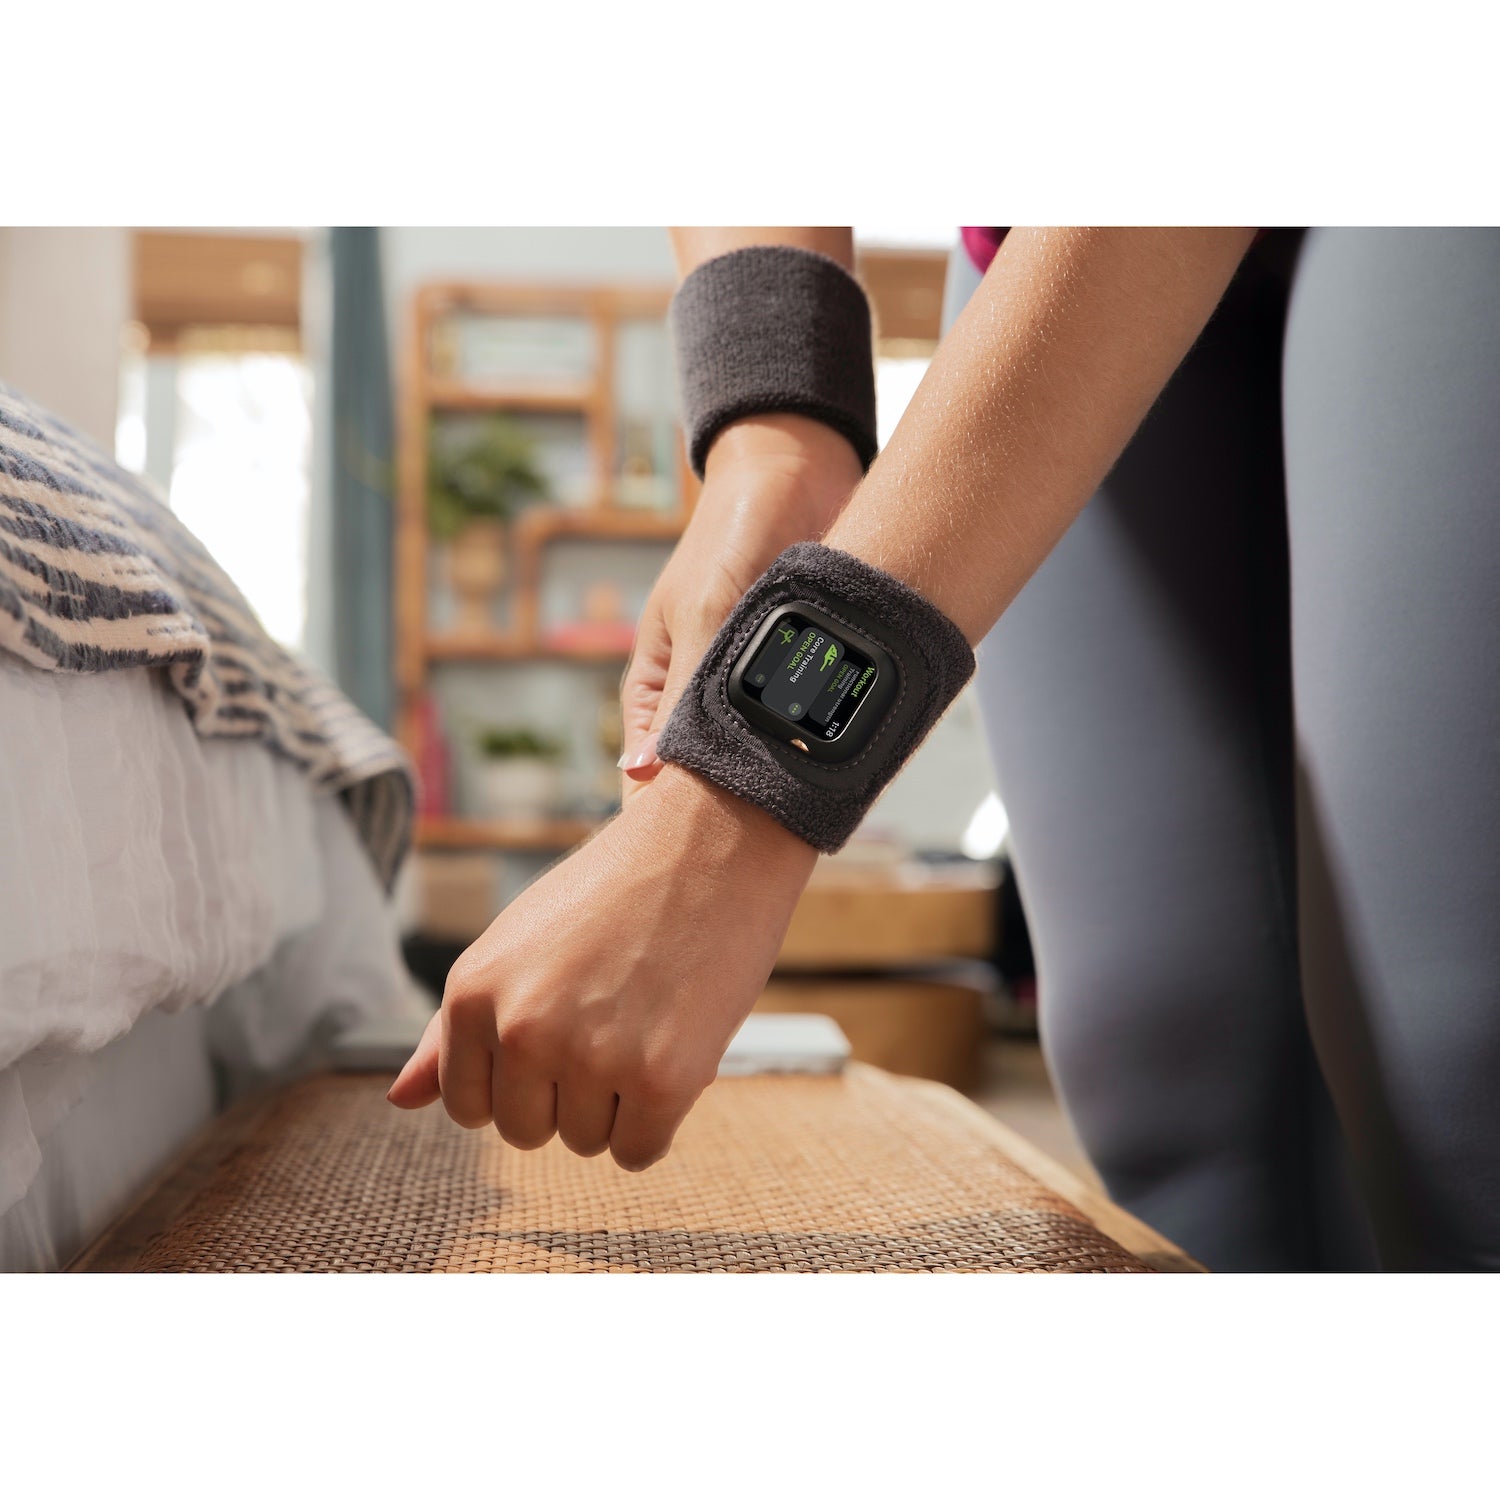 ActionBand for Apple Watch 45mm - Black